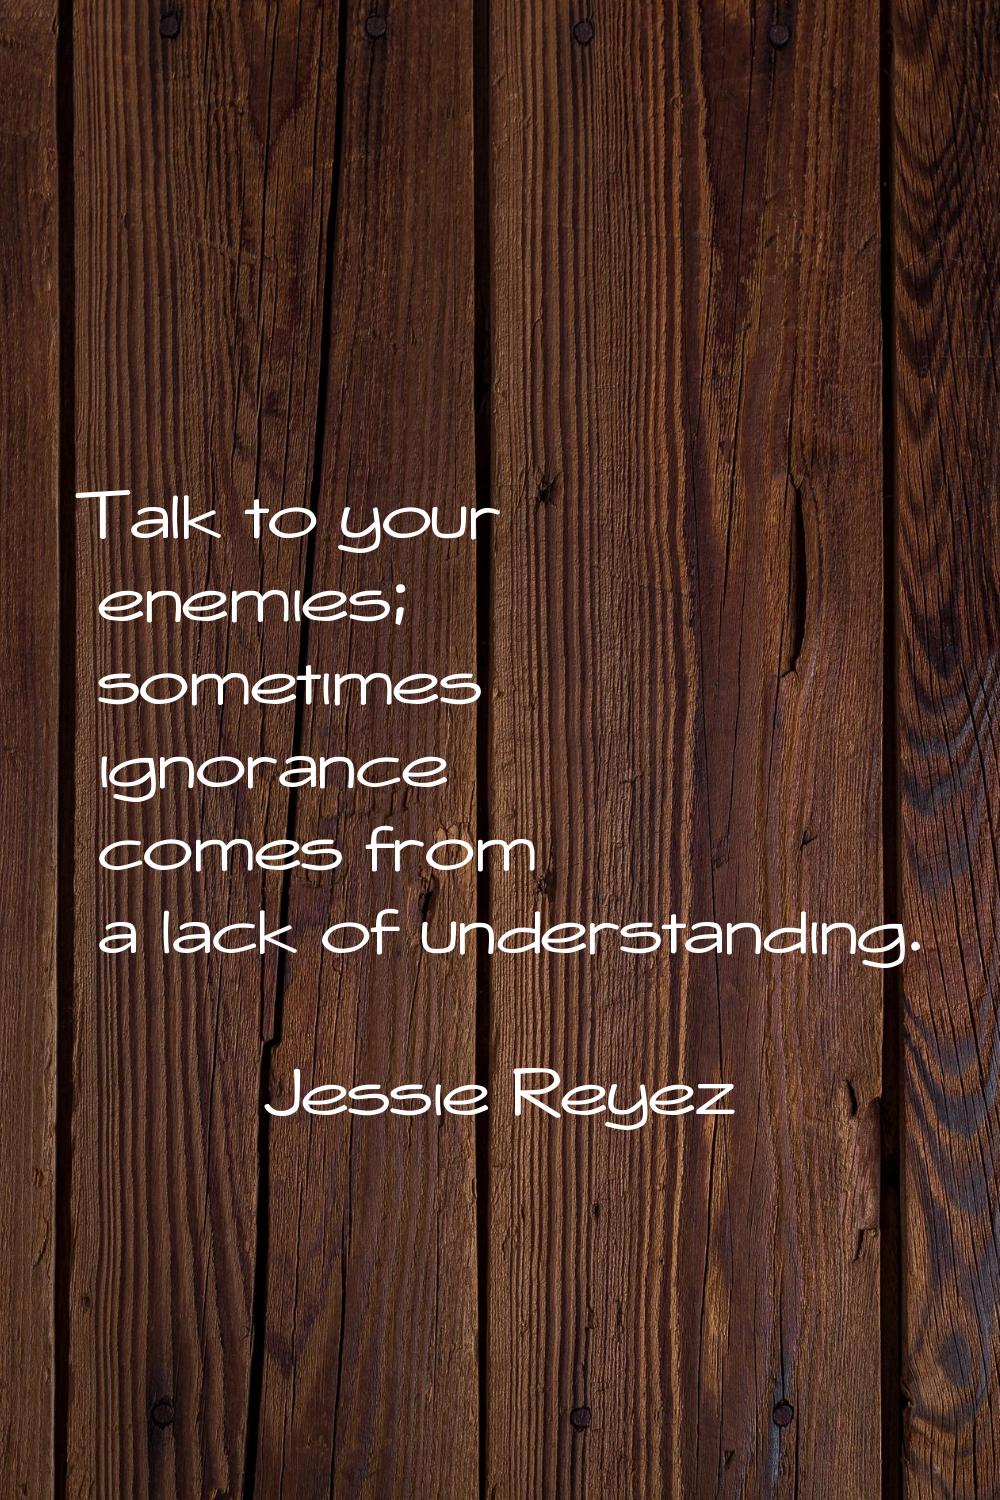 Talk to your enemies; sometimes ignorance comes from a lack of understanding.